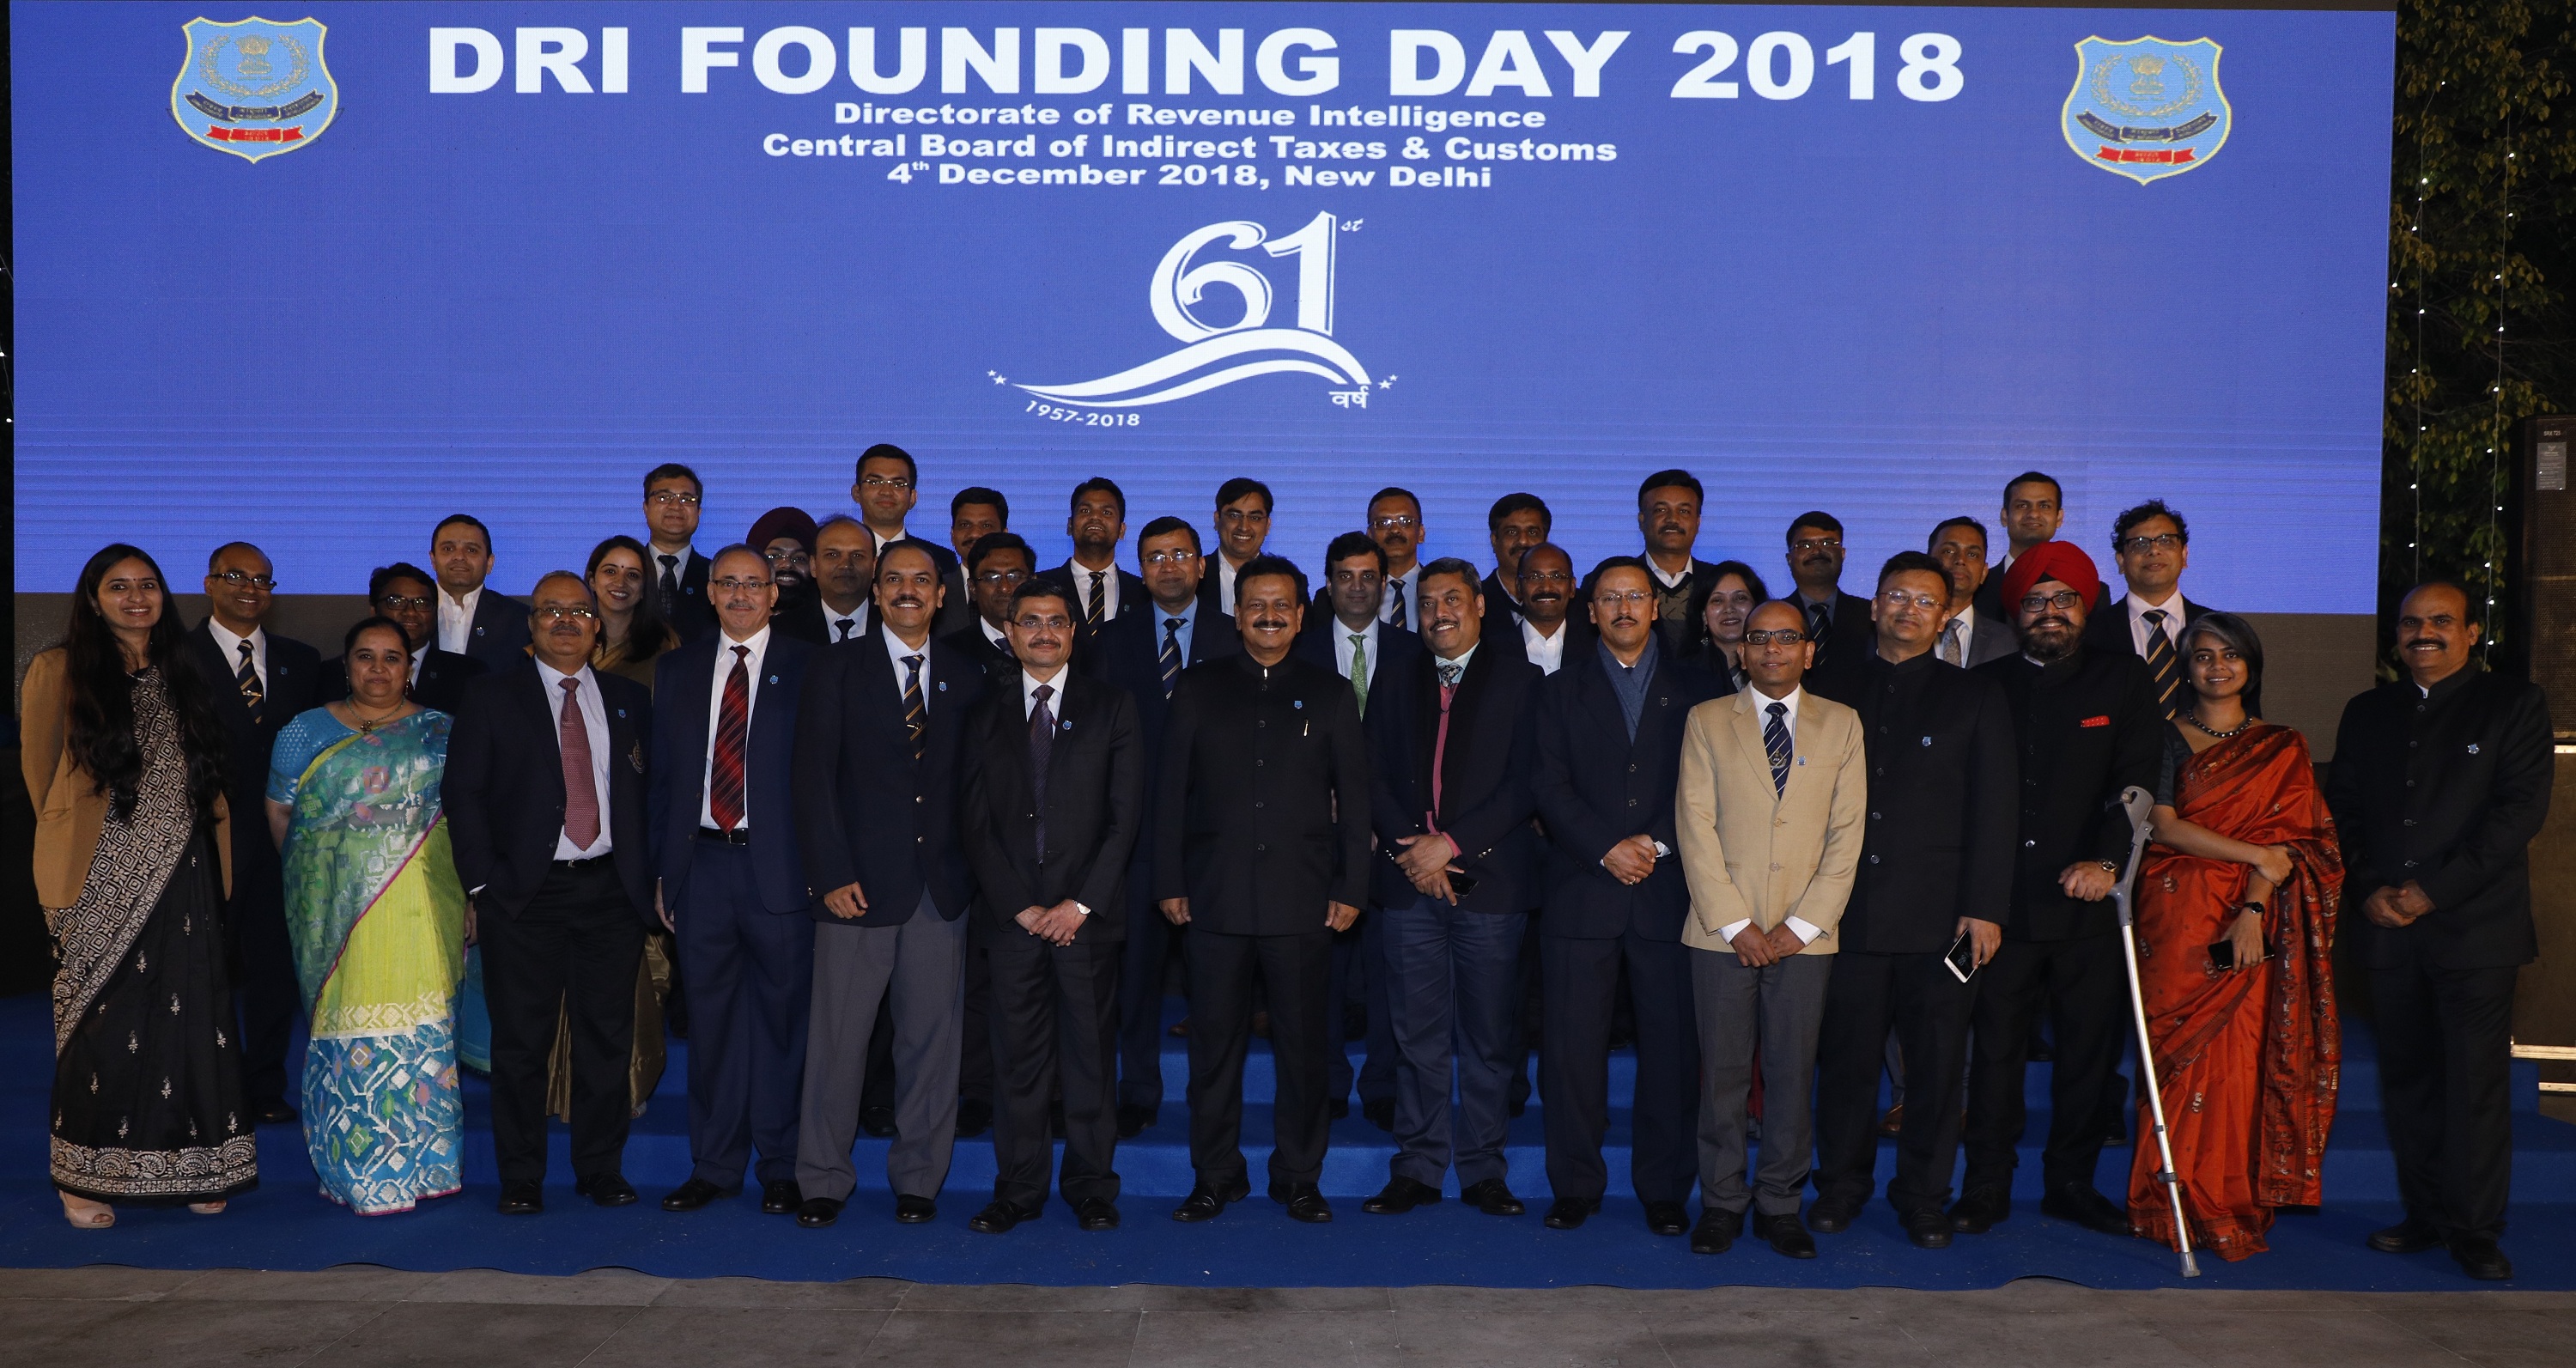 DRI officers on the occasion of DRI Founding Day 2018